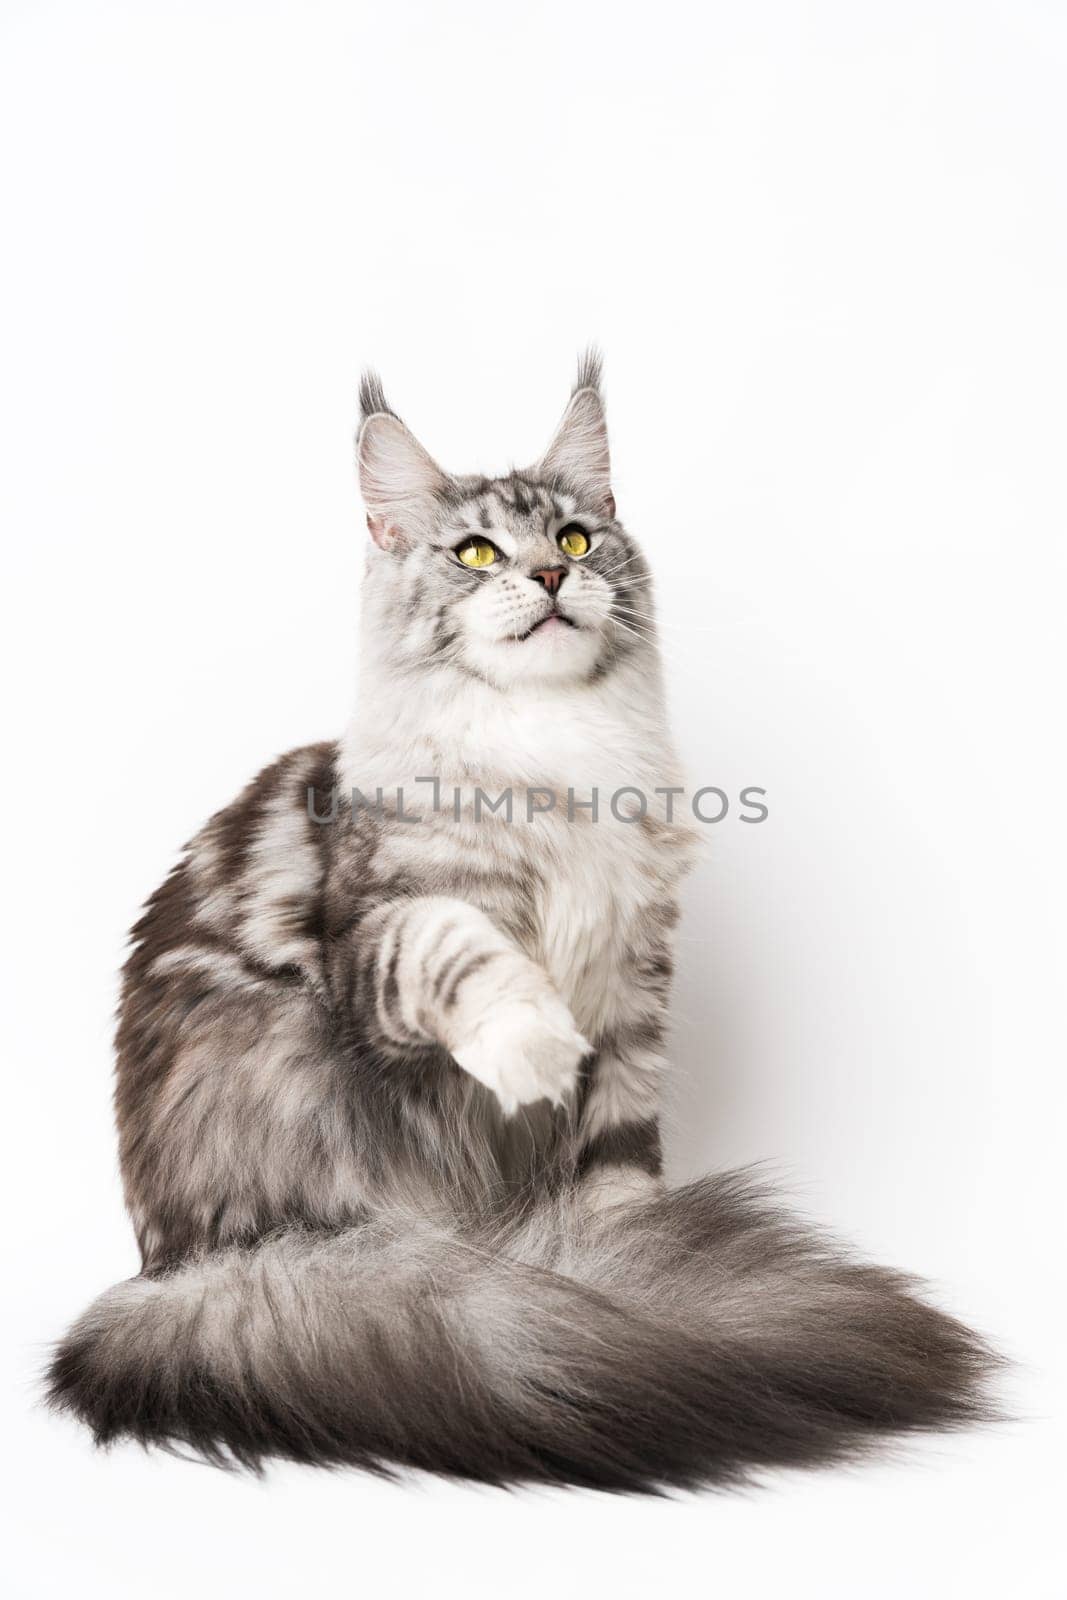 Playful American Forest Cat sitting with one paw raised and looking up. Studio shot kitten on white background. Part of series photos of thoroughbred kitty black silver classic tabby and white color.